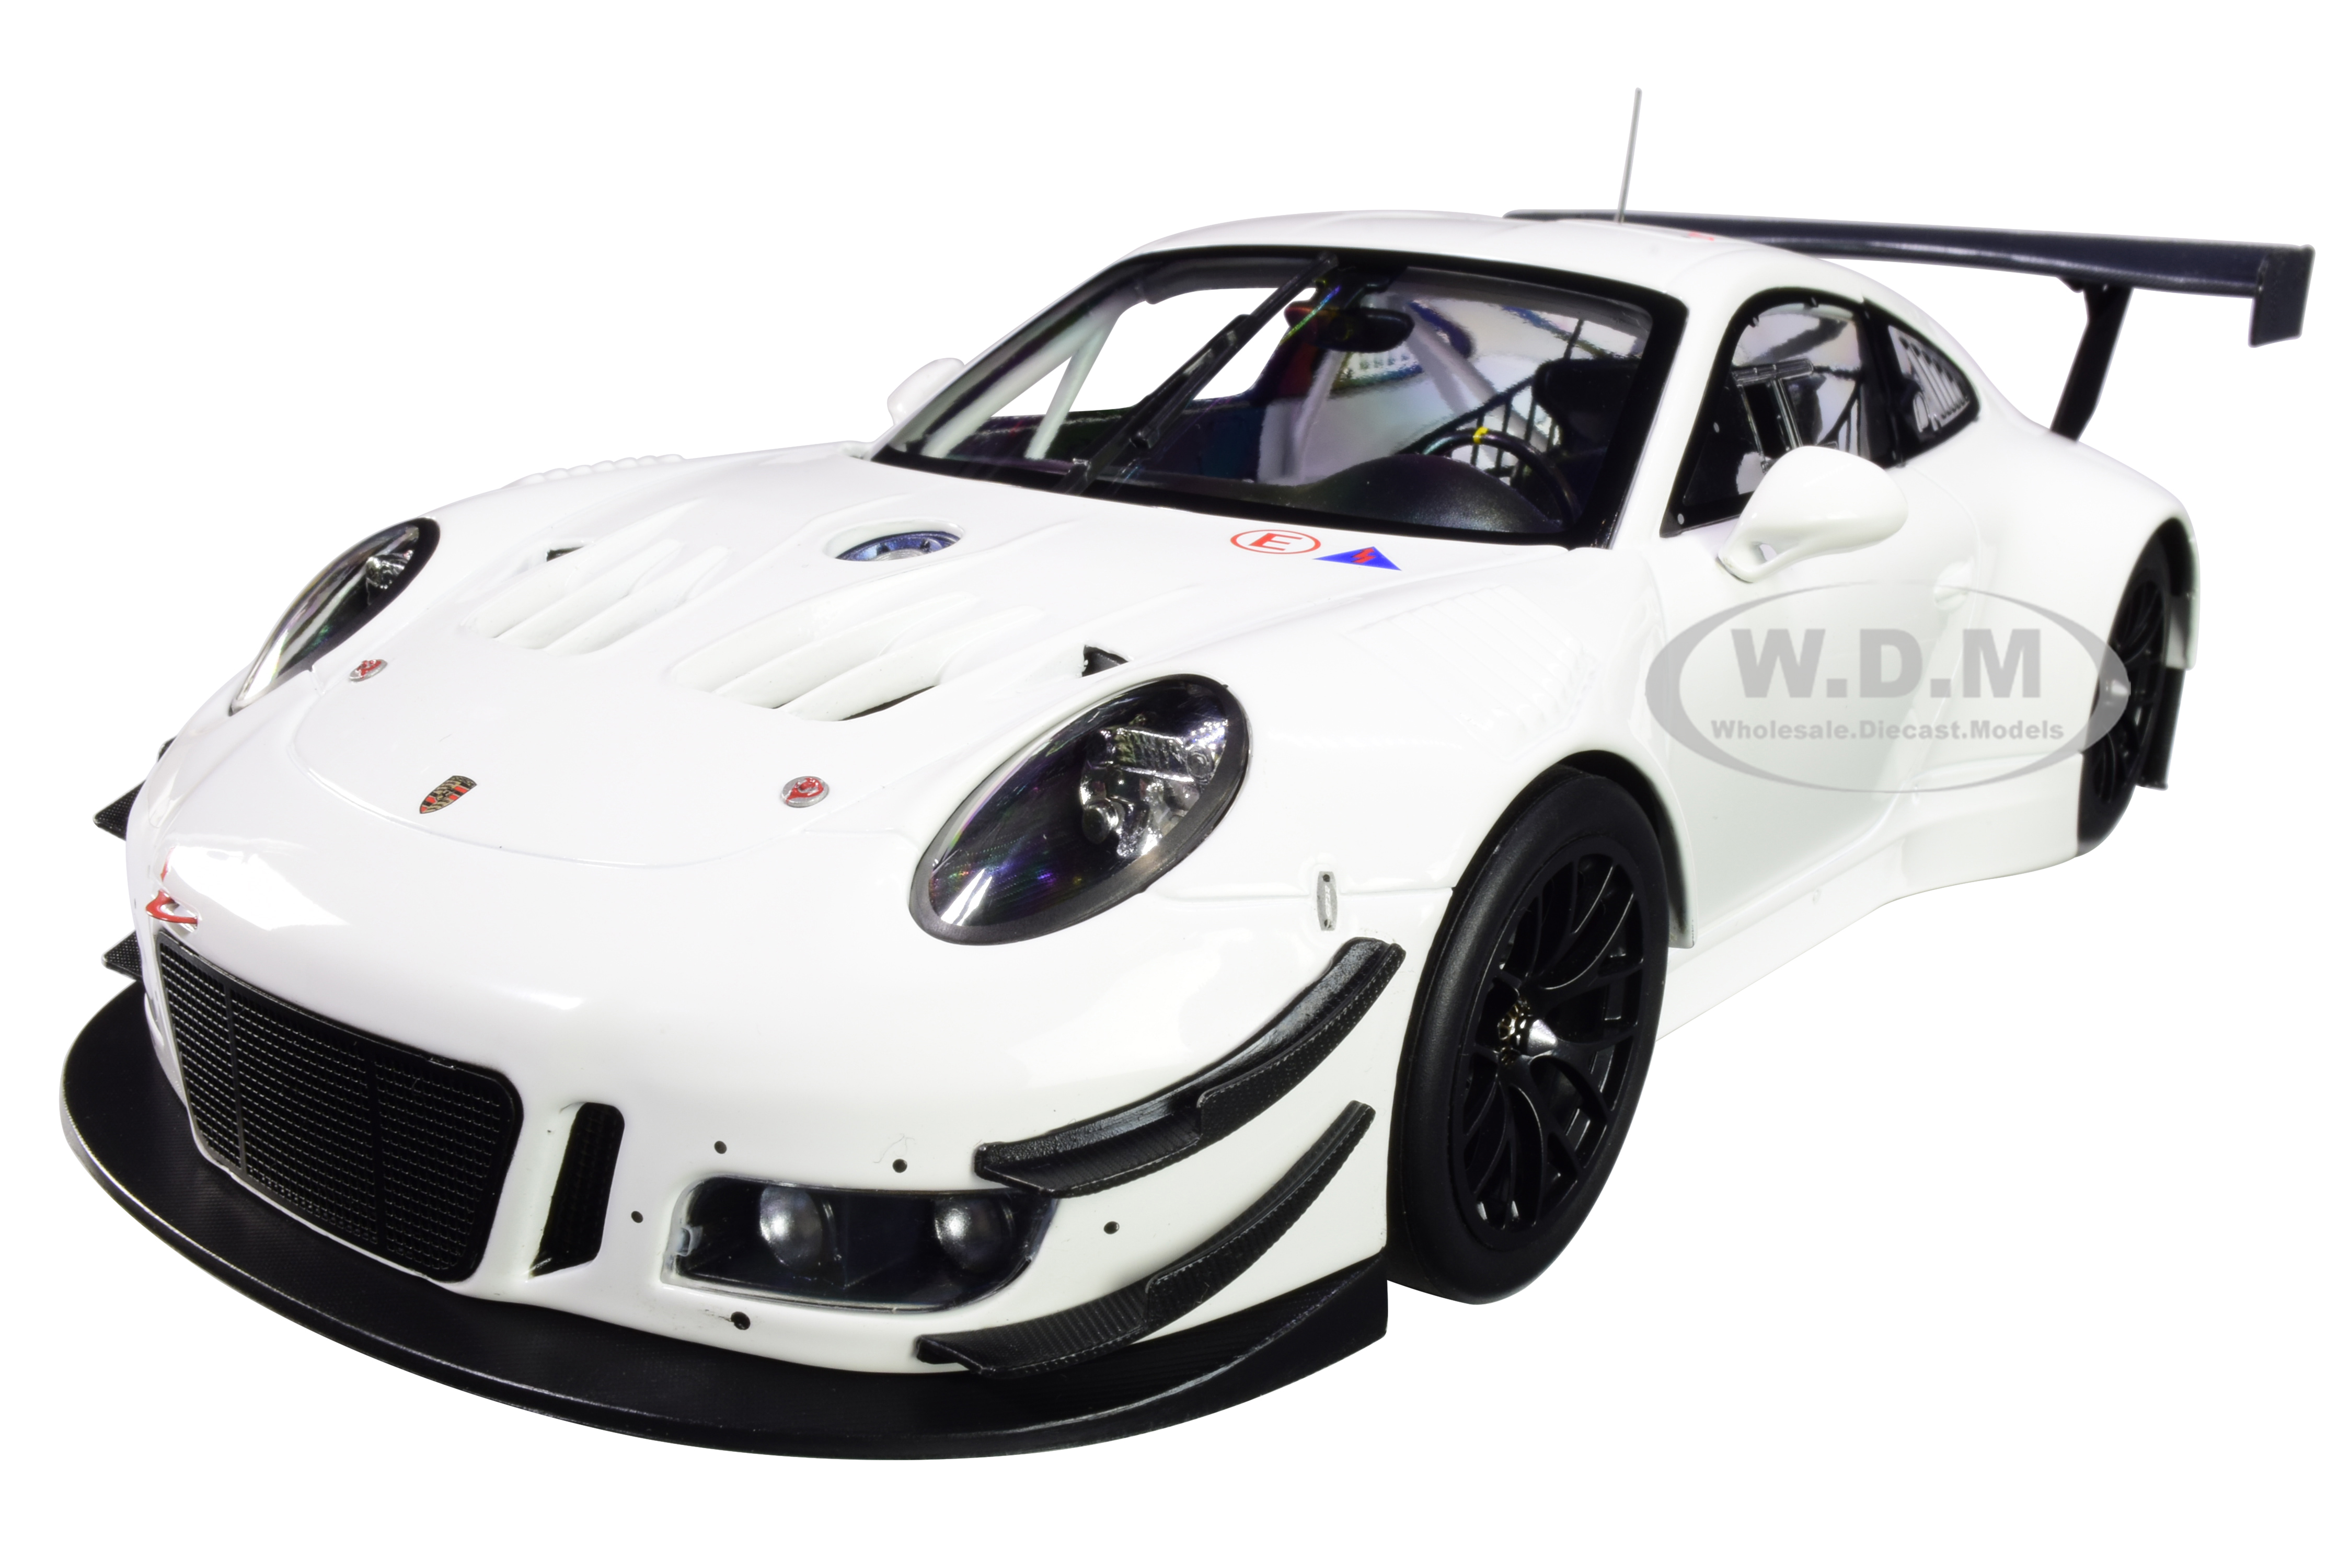 2018 Porsche 911 Gt3 R White Limited Edition To 300 Pieces Worldwide 1/18 Diecast Model Car By Minichamps